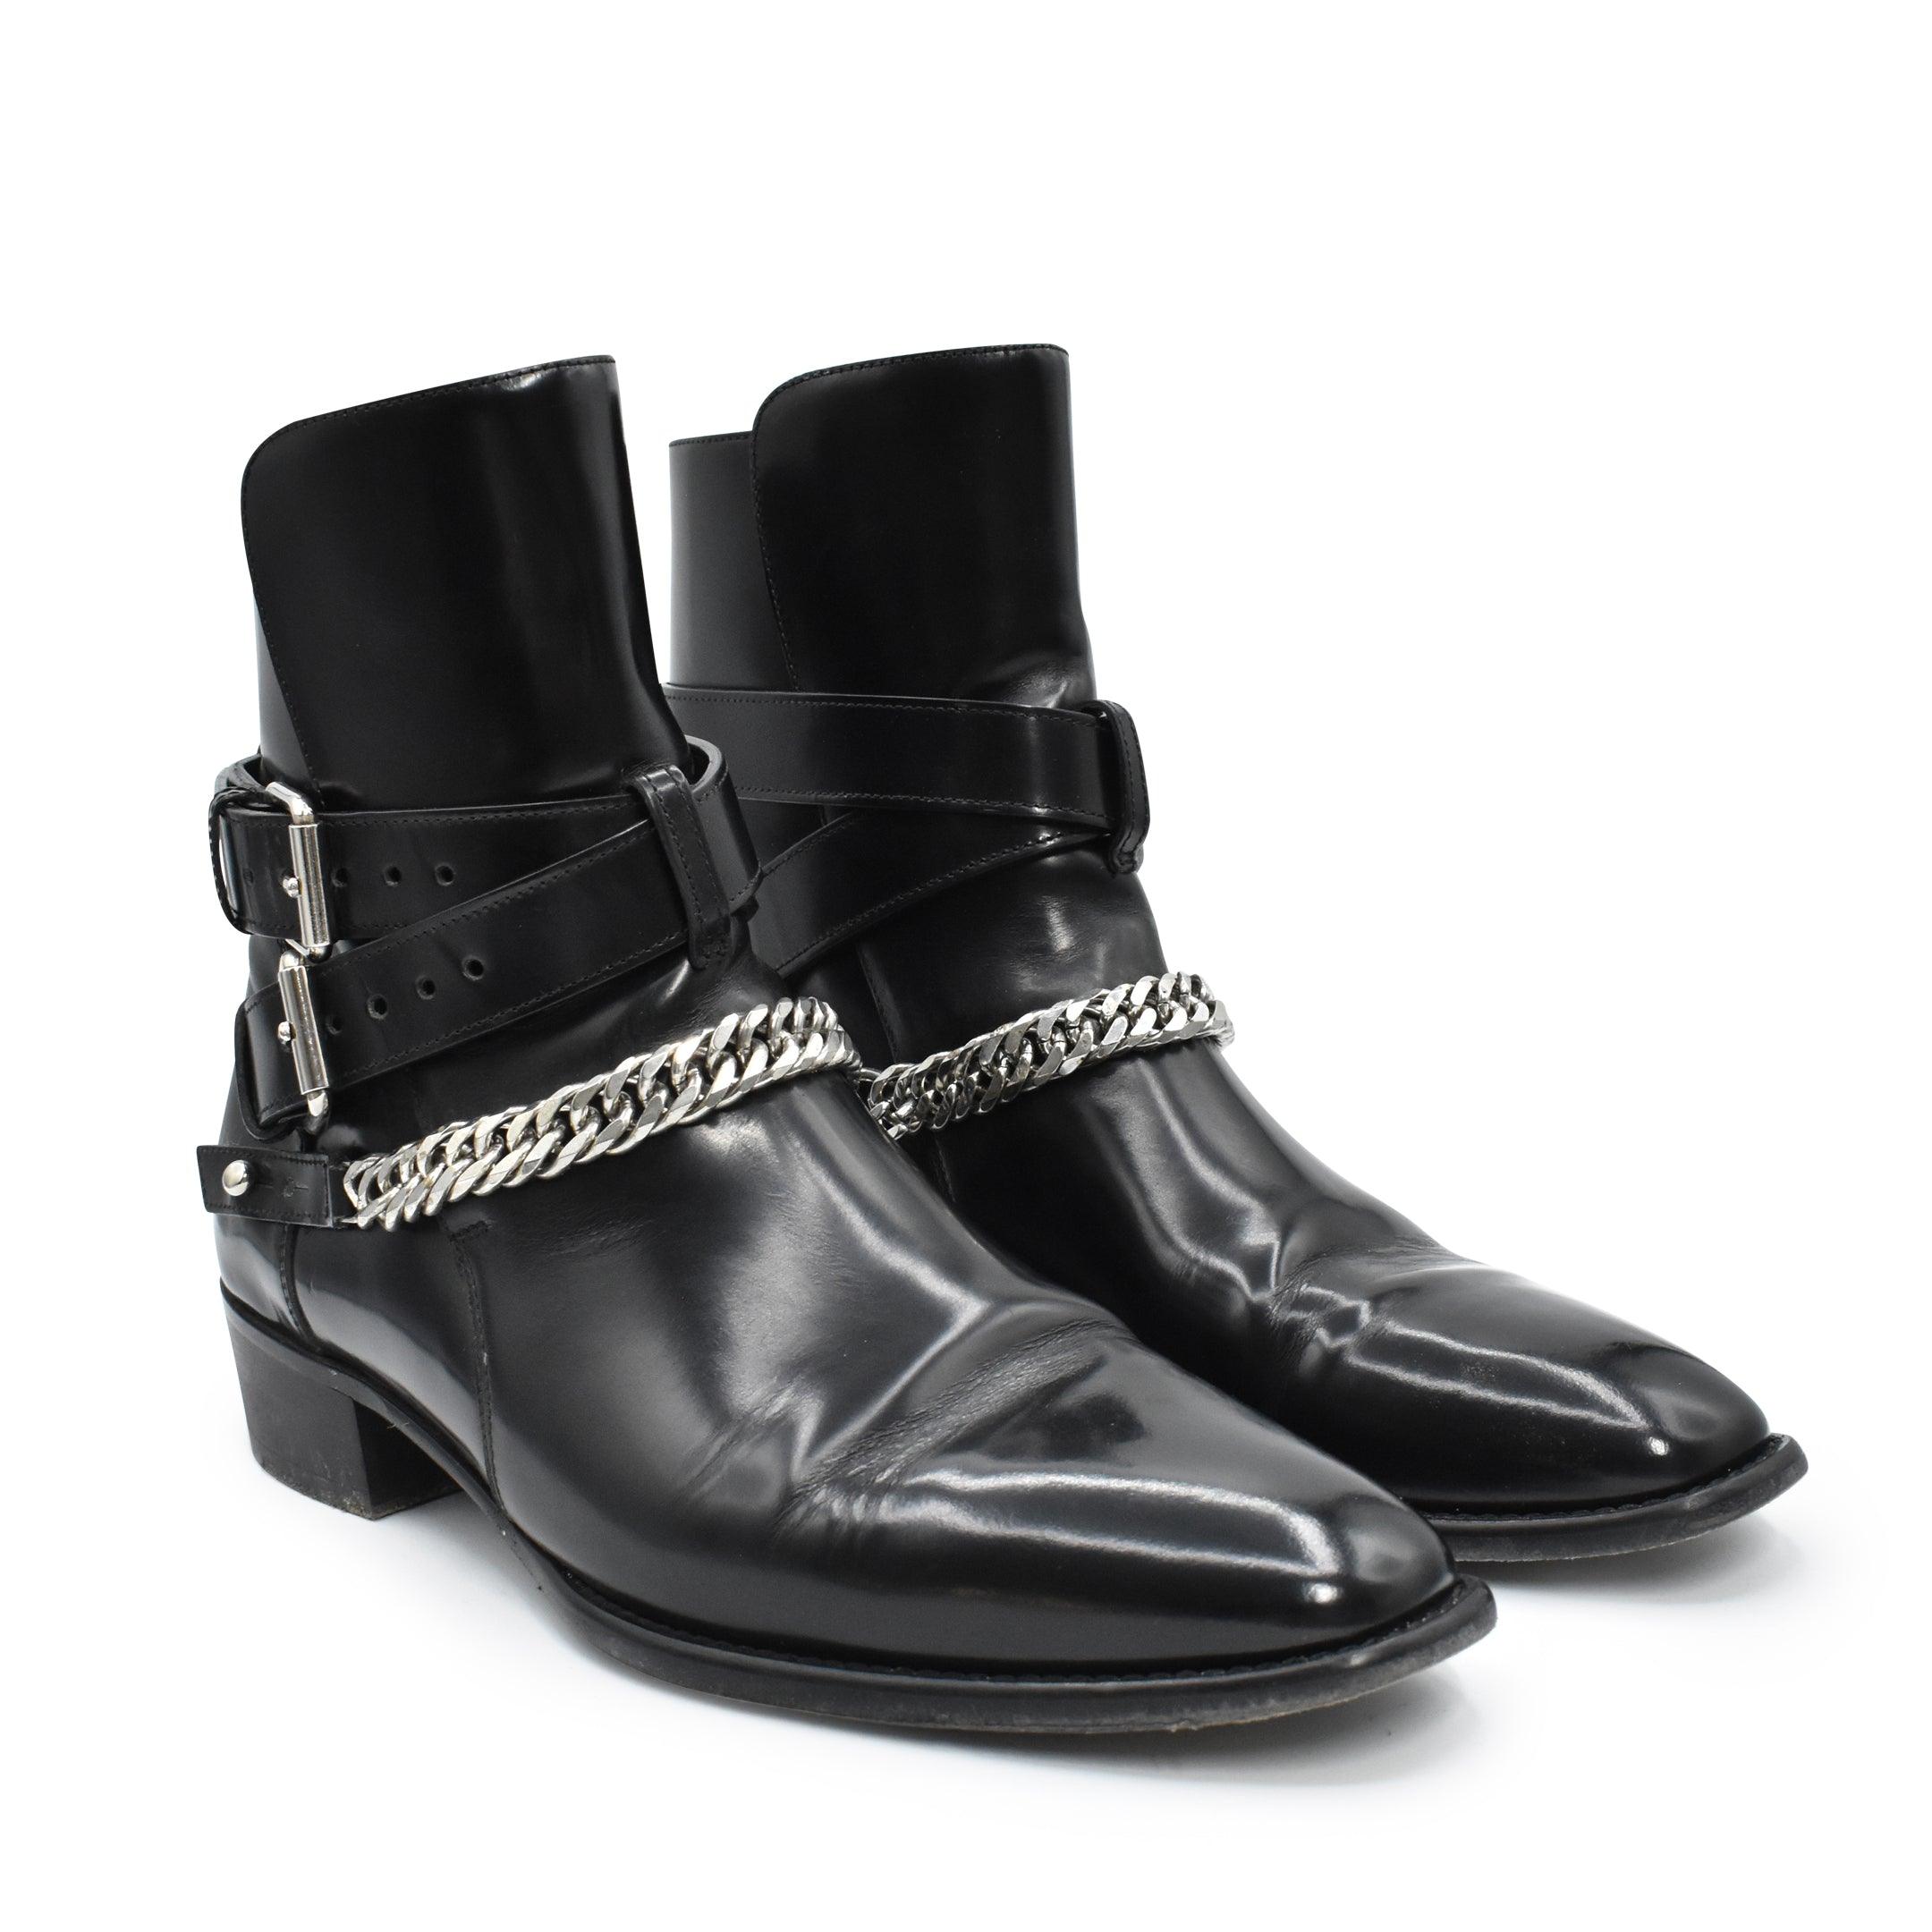 Amiri Ankle Boots - Men's 45 - Fashionably Yours